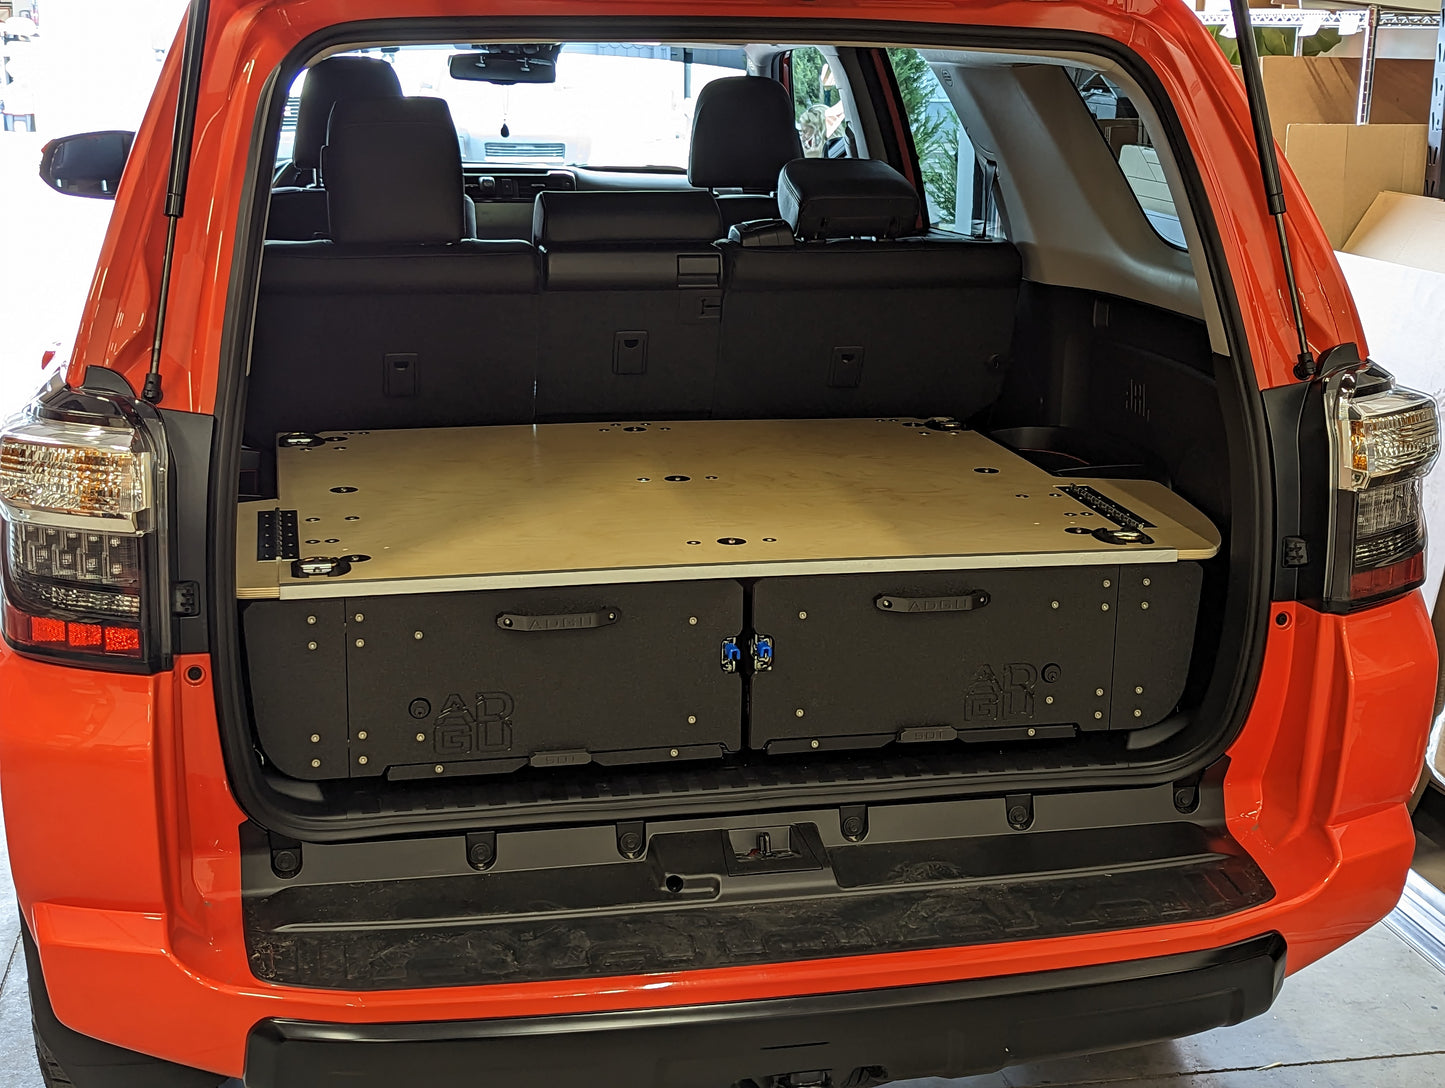 5th Gen 4Runner with dual lockable drawers plus slide out table for vehicle storage and organization 